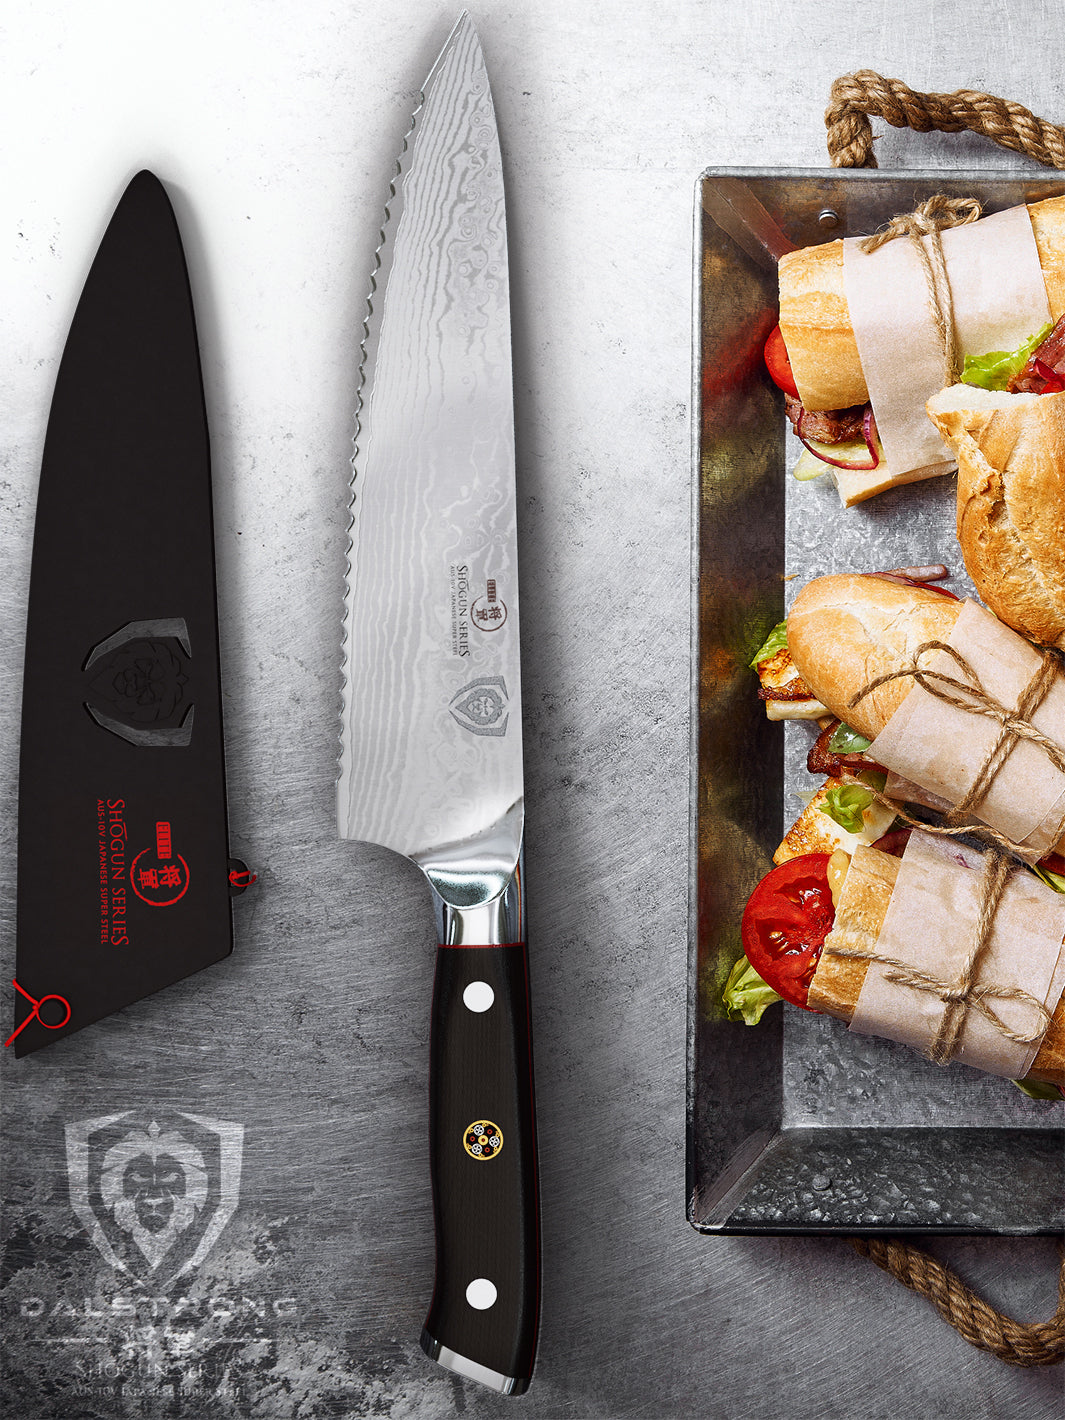 Dalstrong shogun series 7.5 inch serrated chef knife with black handle, sheath and sandwiches.